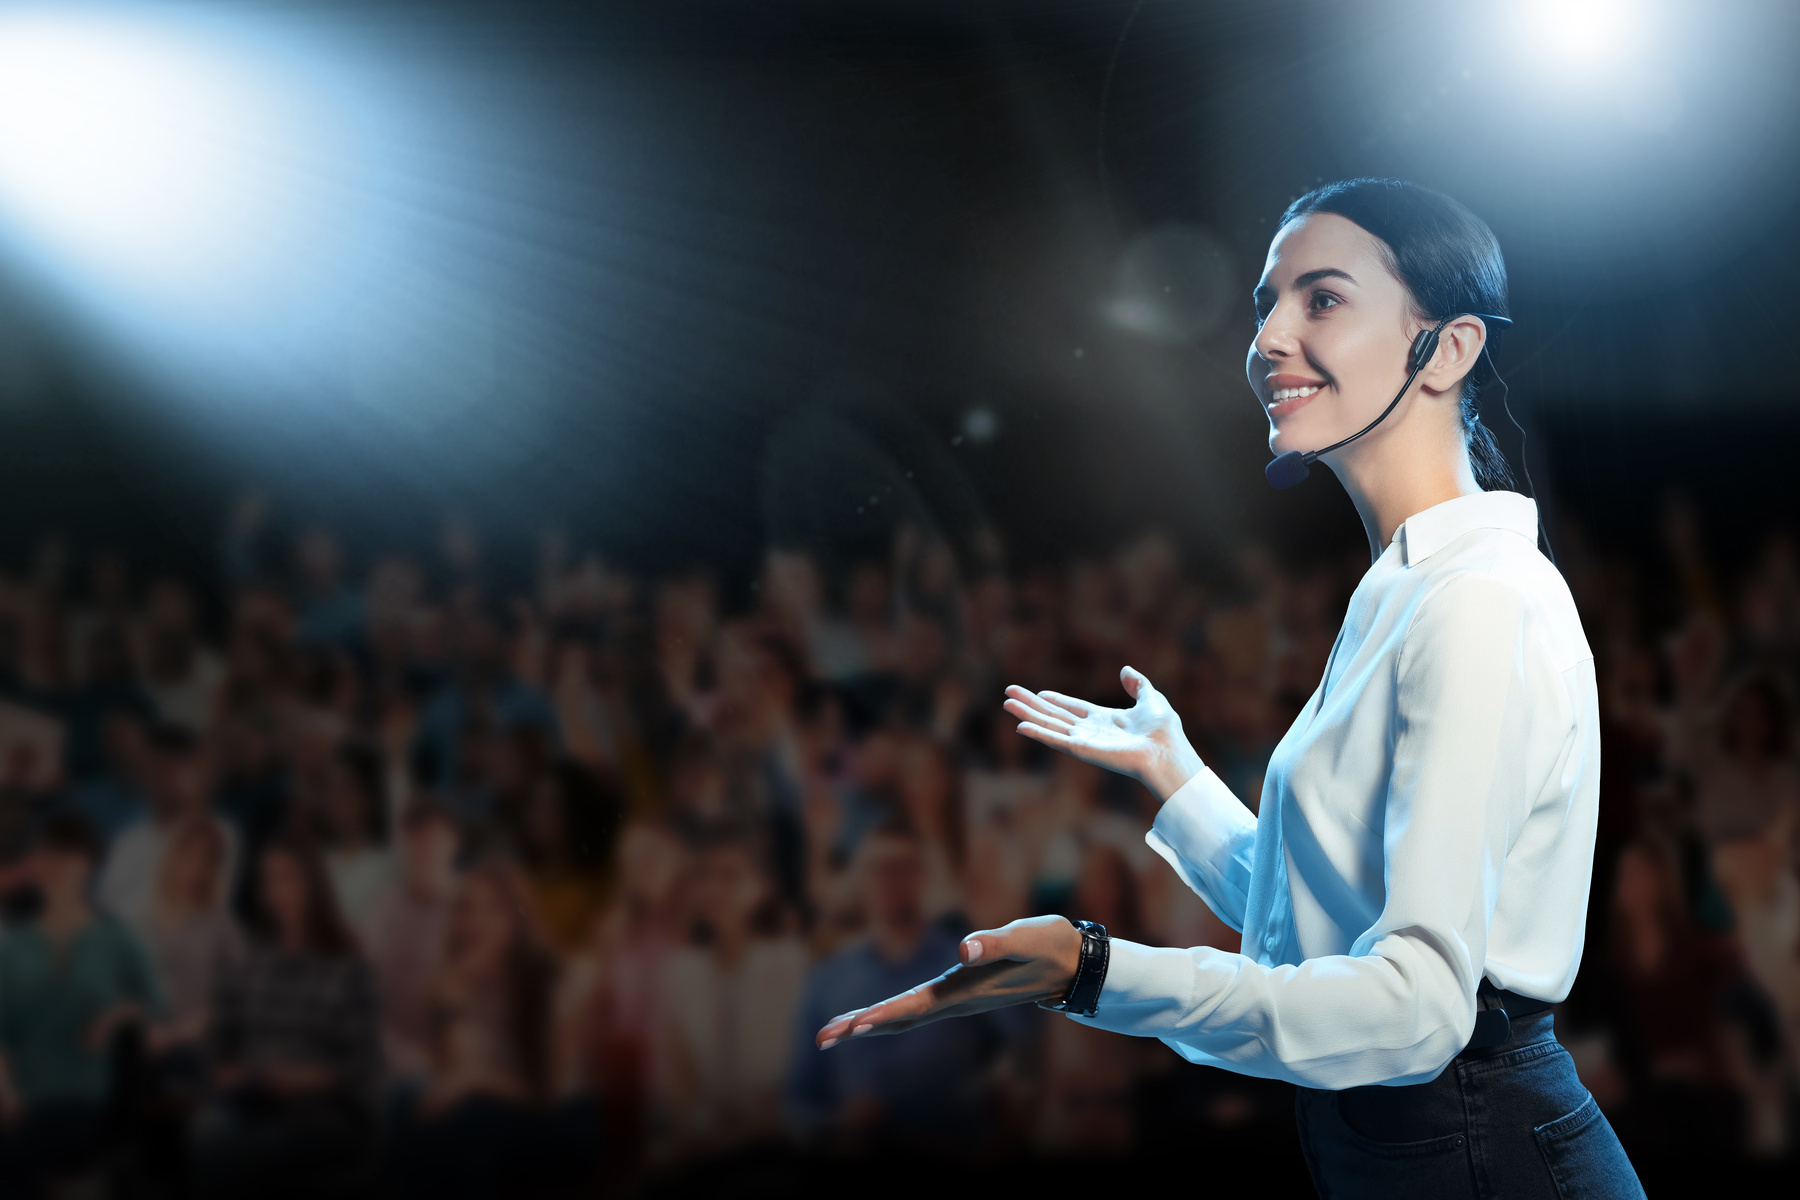 Motivational Speaker with Headset Performing on Stage